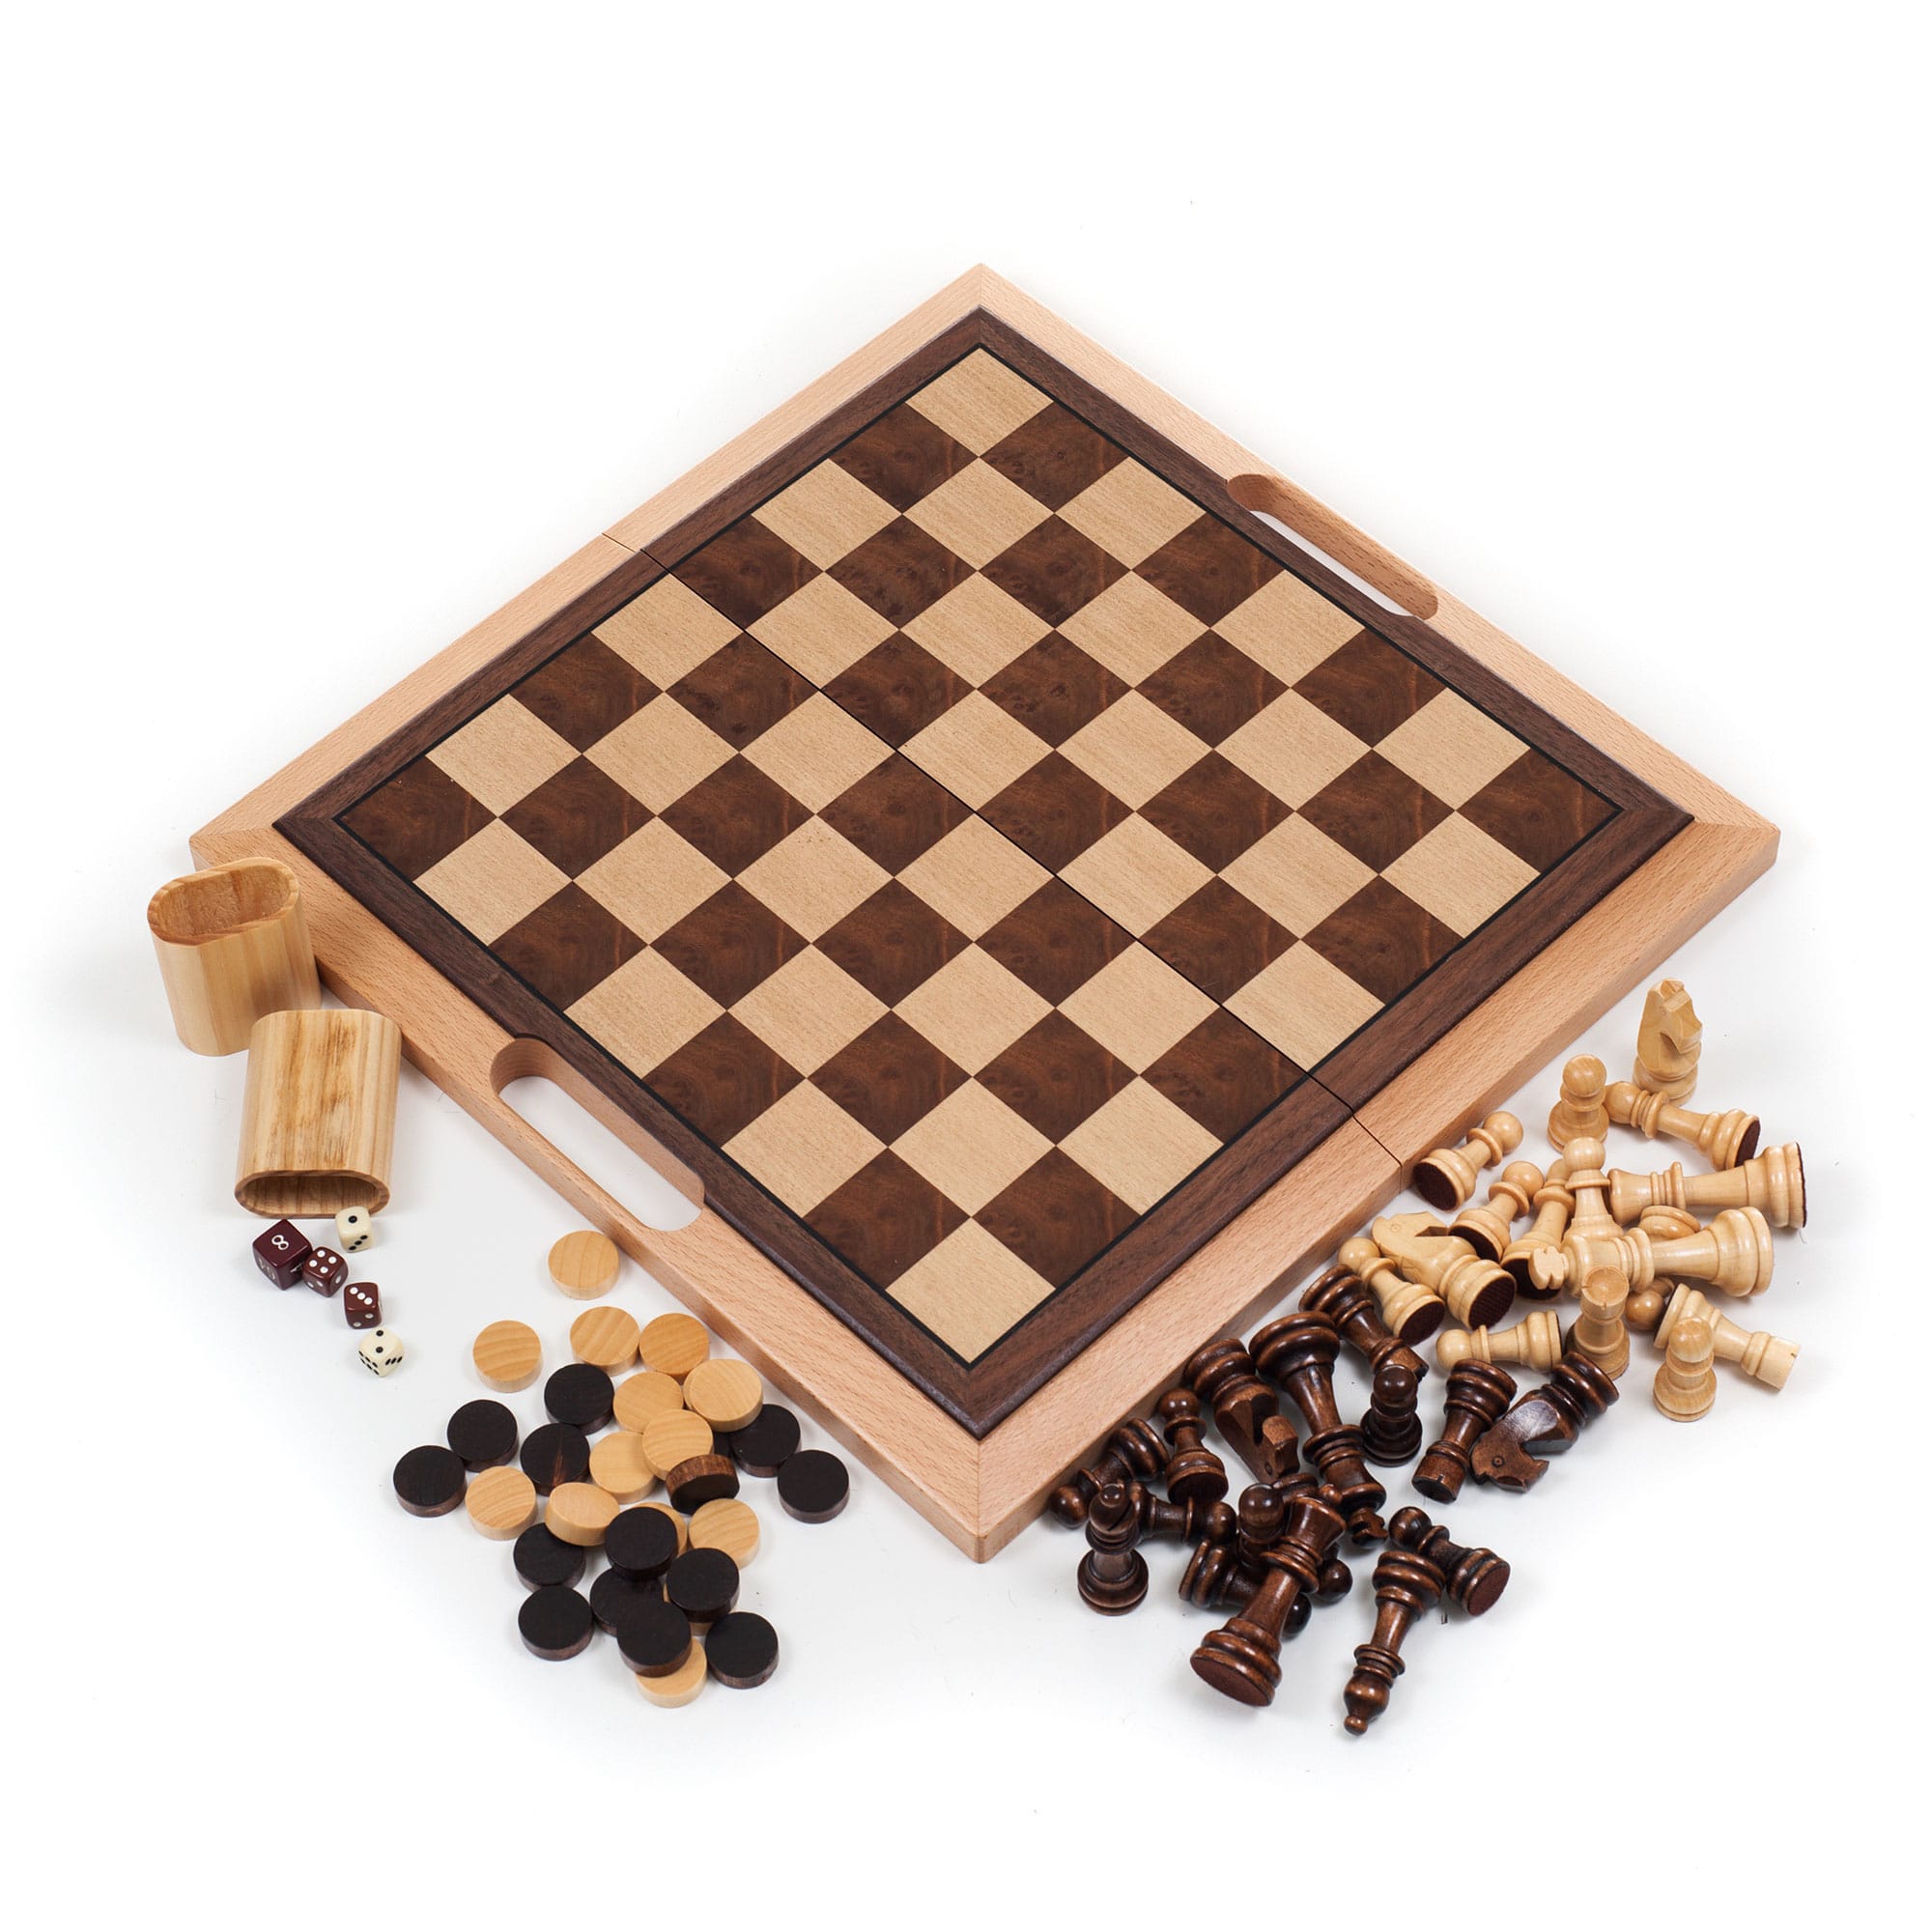 Deluxe Wood Monopoly Game Set